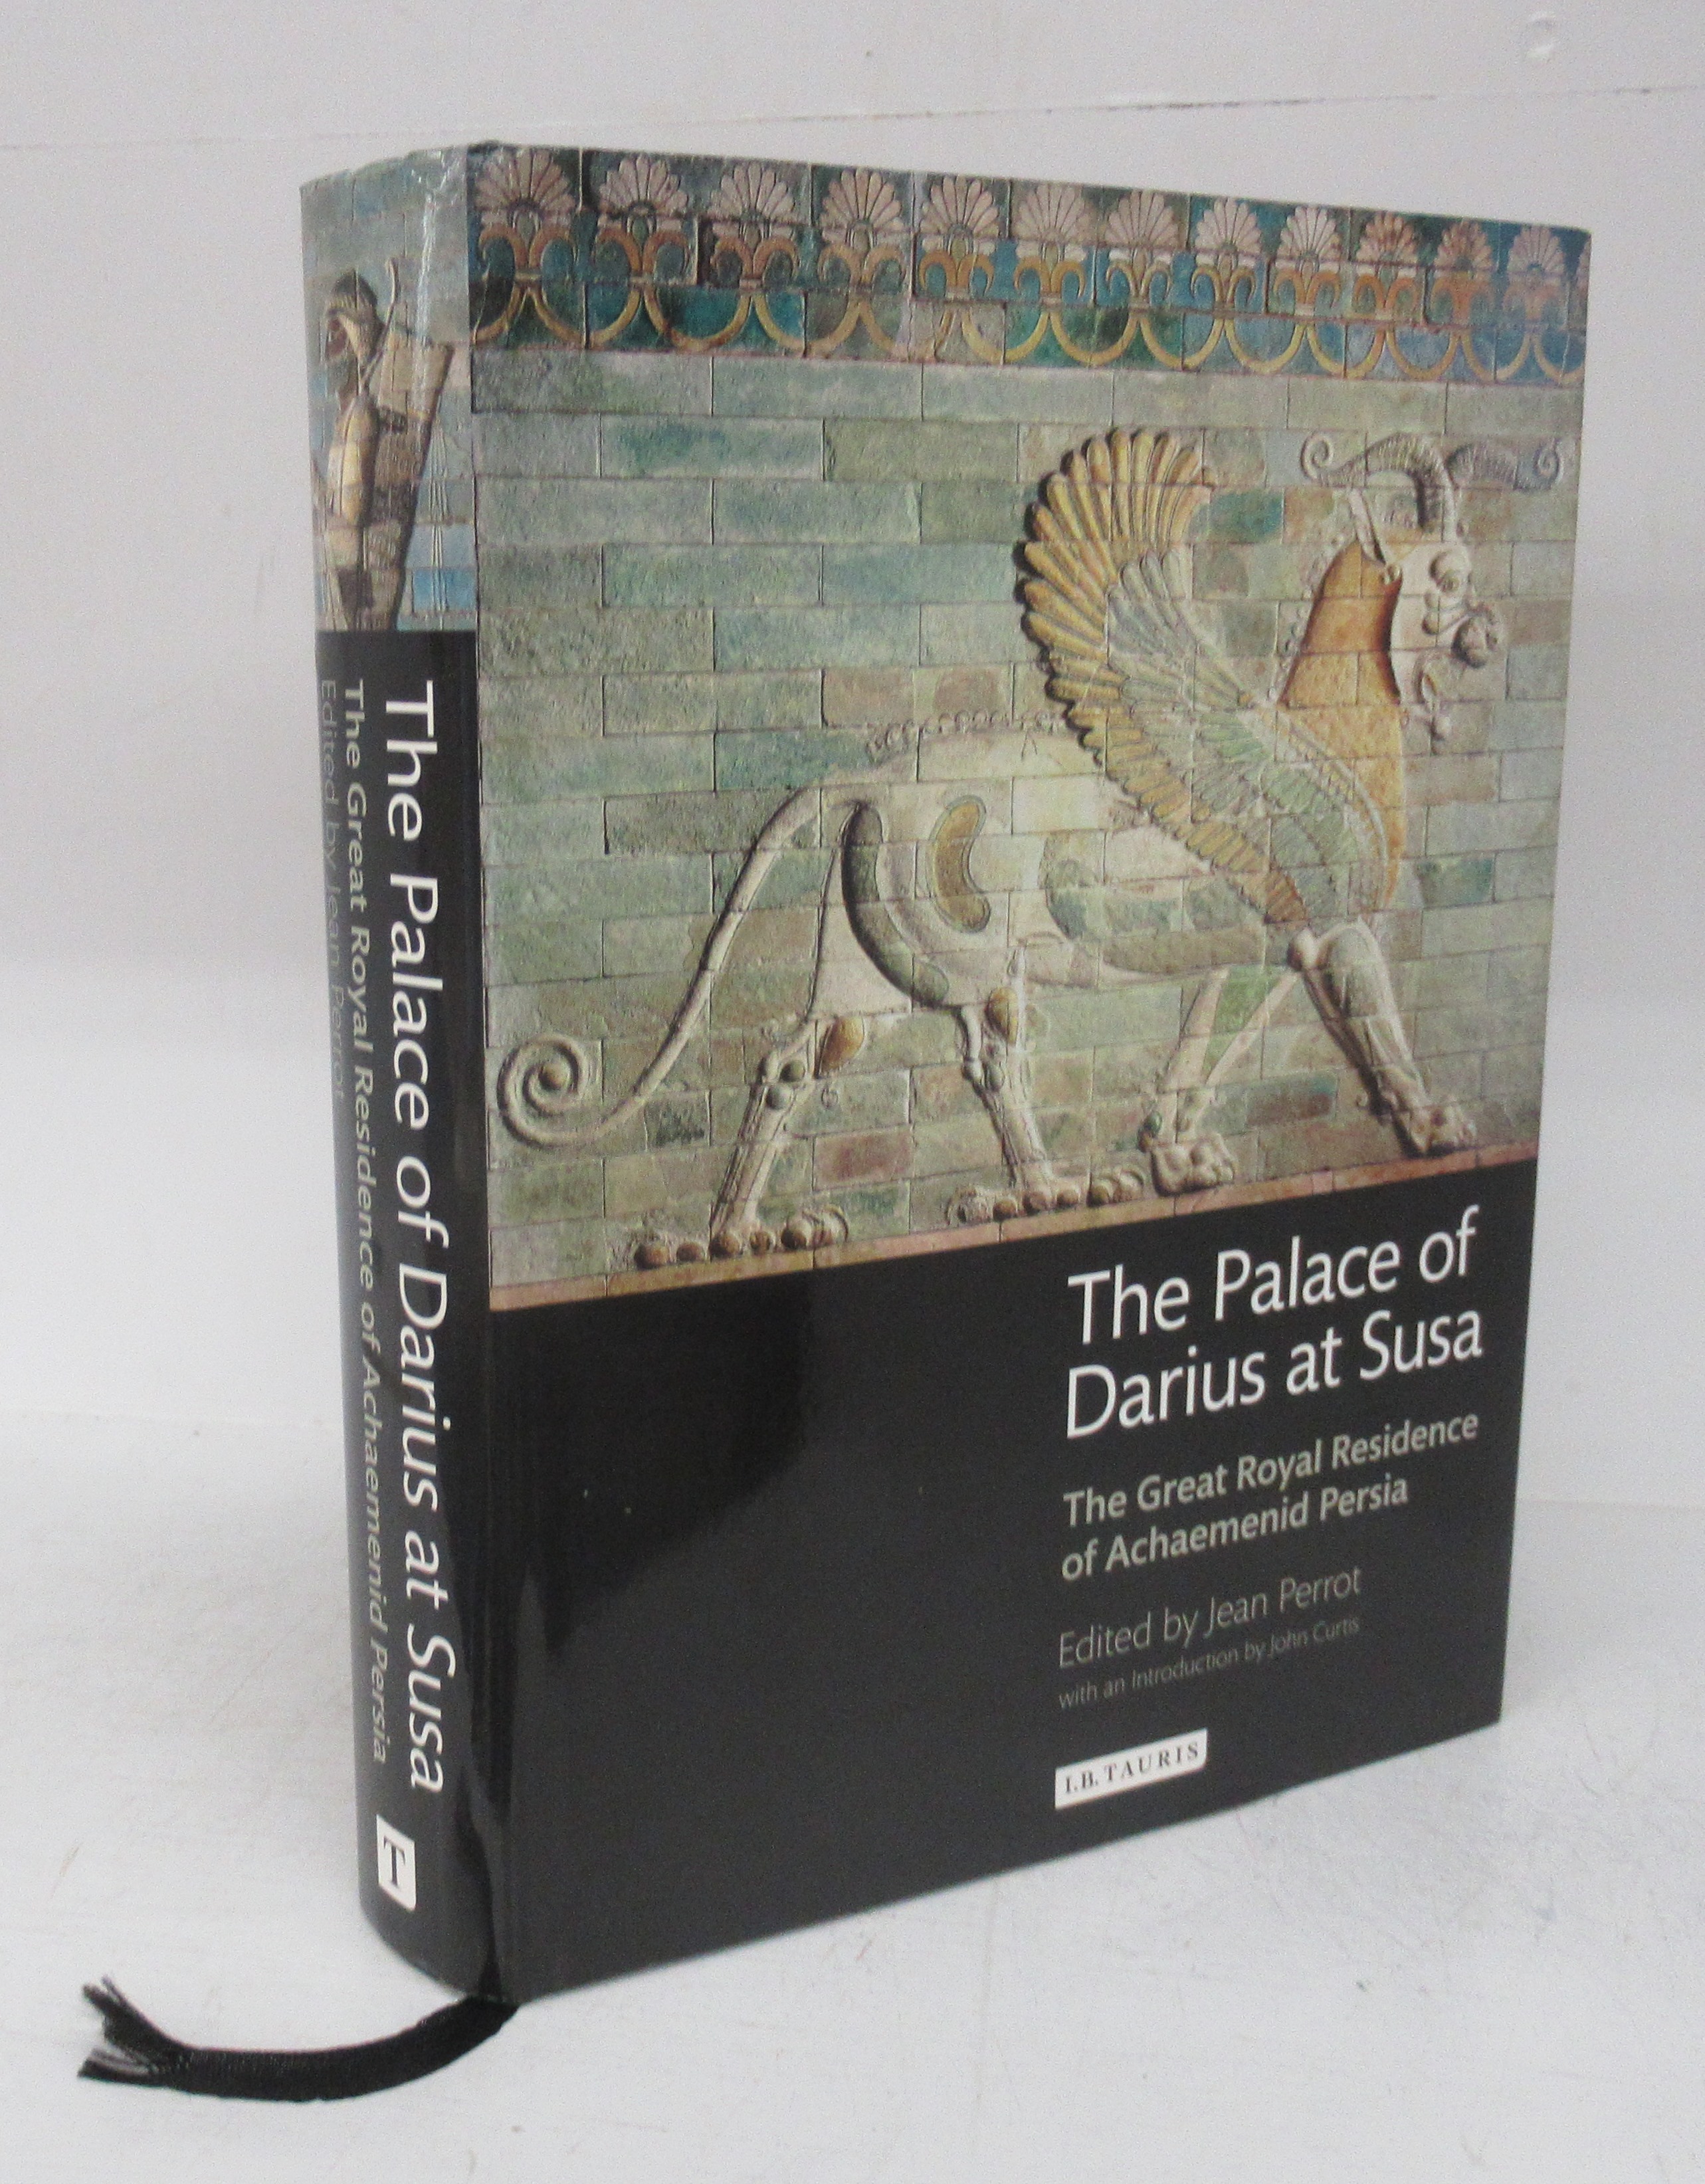 The Palace of Darius at Susa: The Great Royal Residence of Achaemenid Persia - PERROT, Jean (ed.); COLLON, Gerard (trans.)